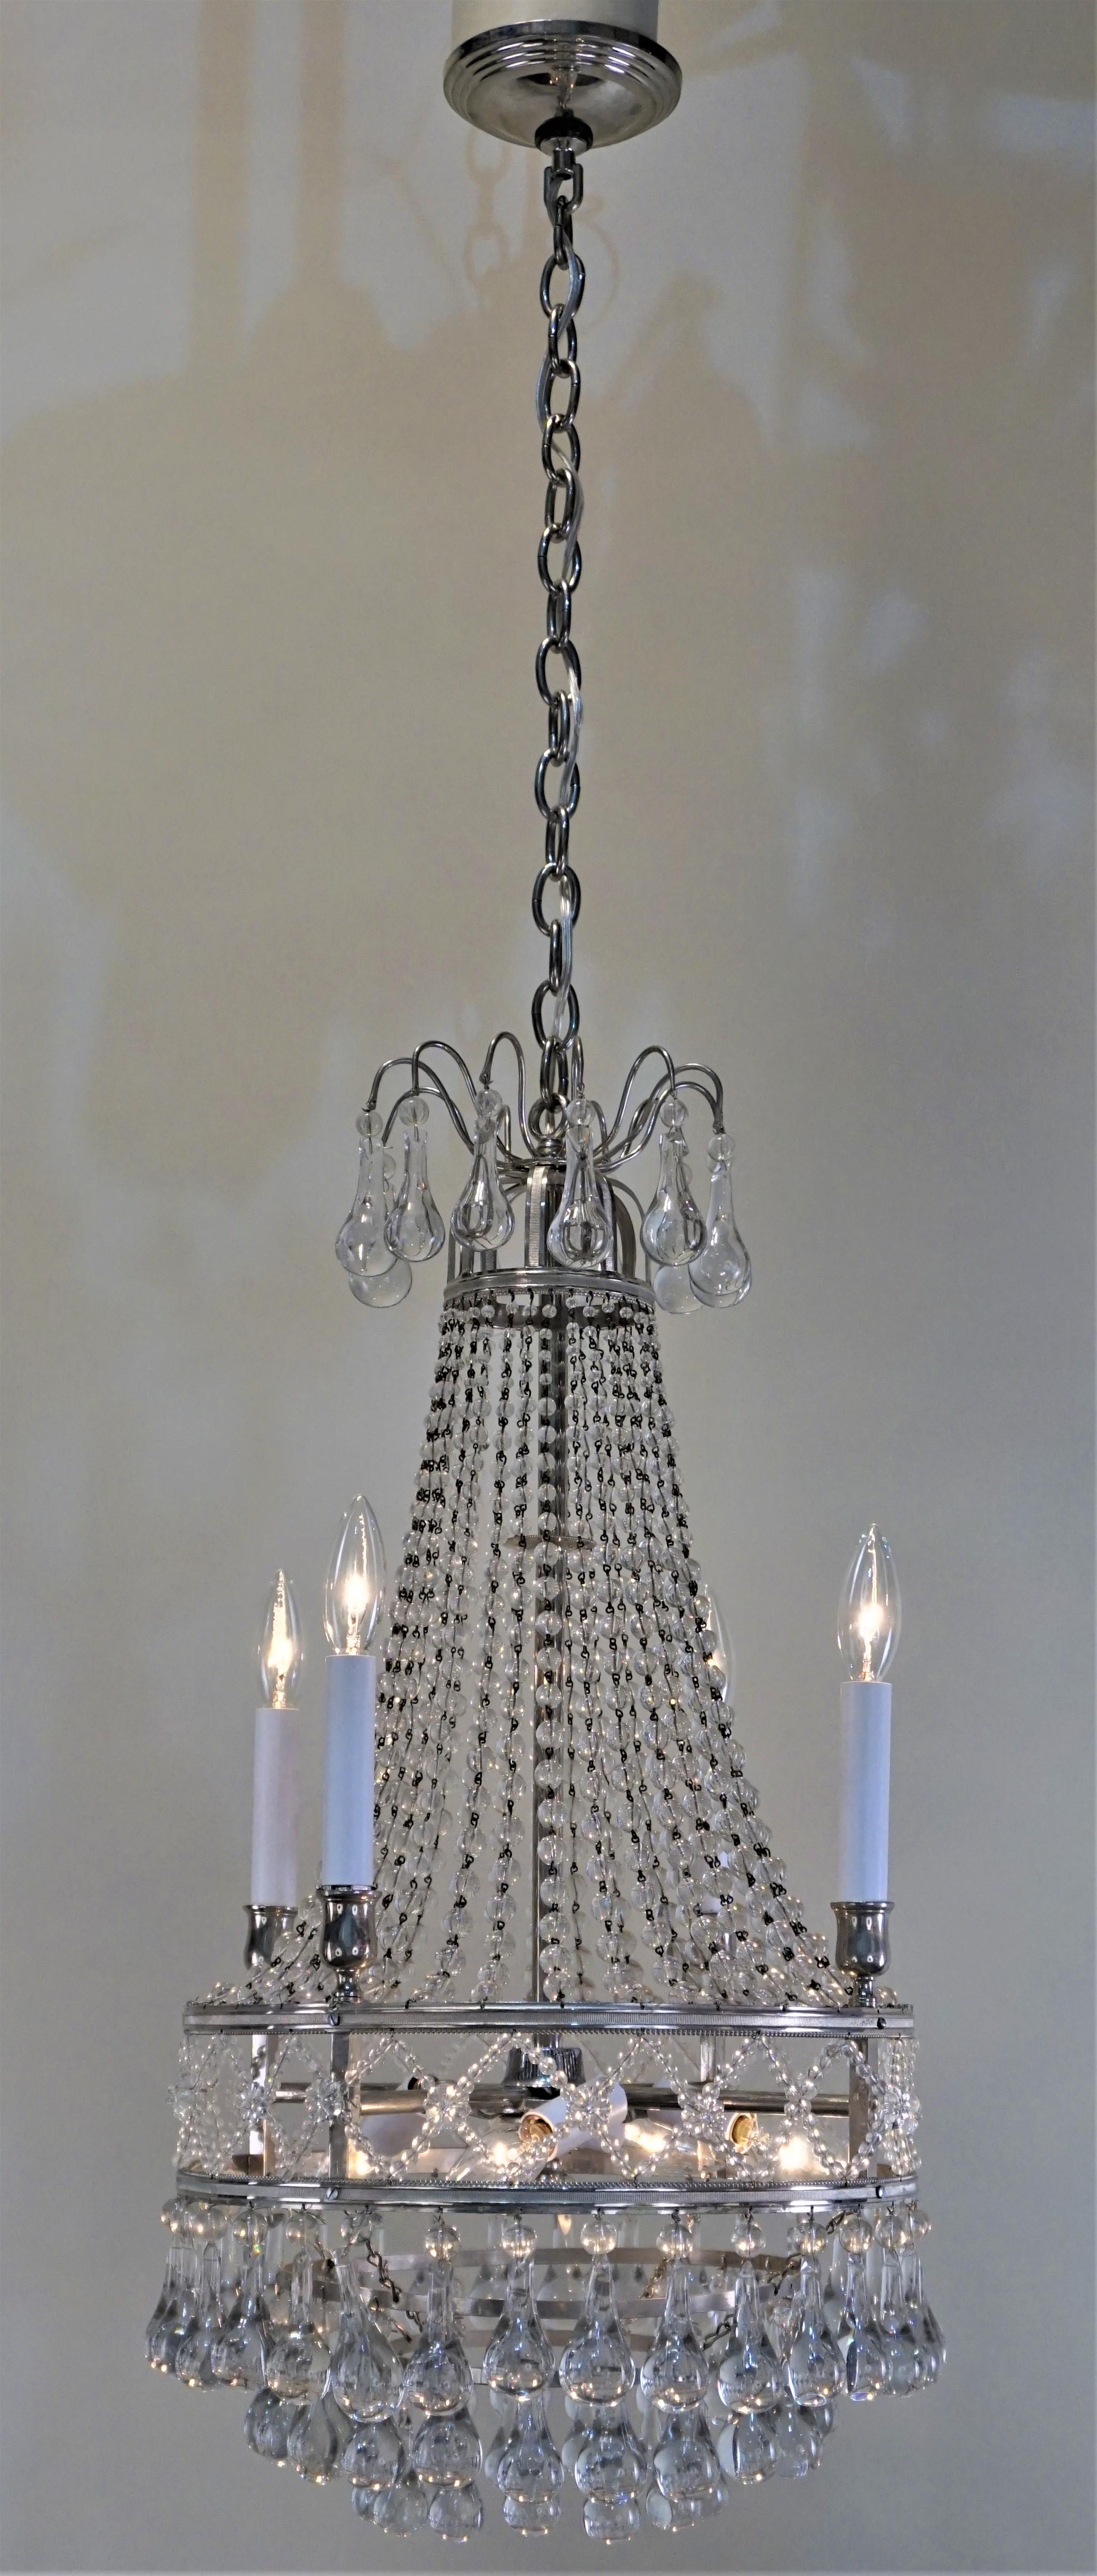 Mid-20th Century French 1930s Art Deco Crystal Chandelier